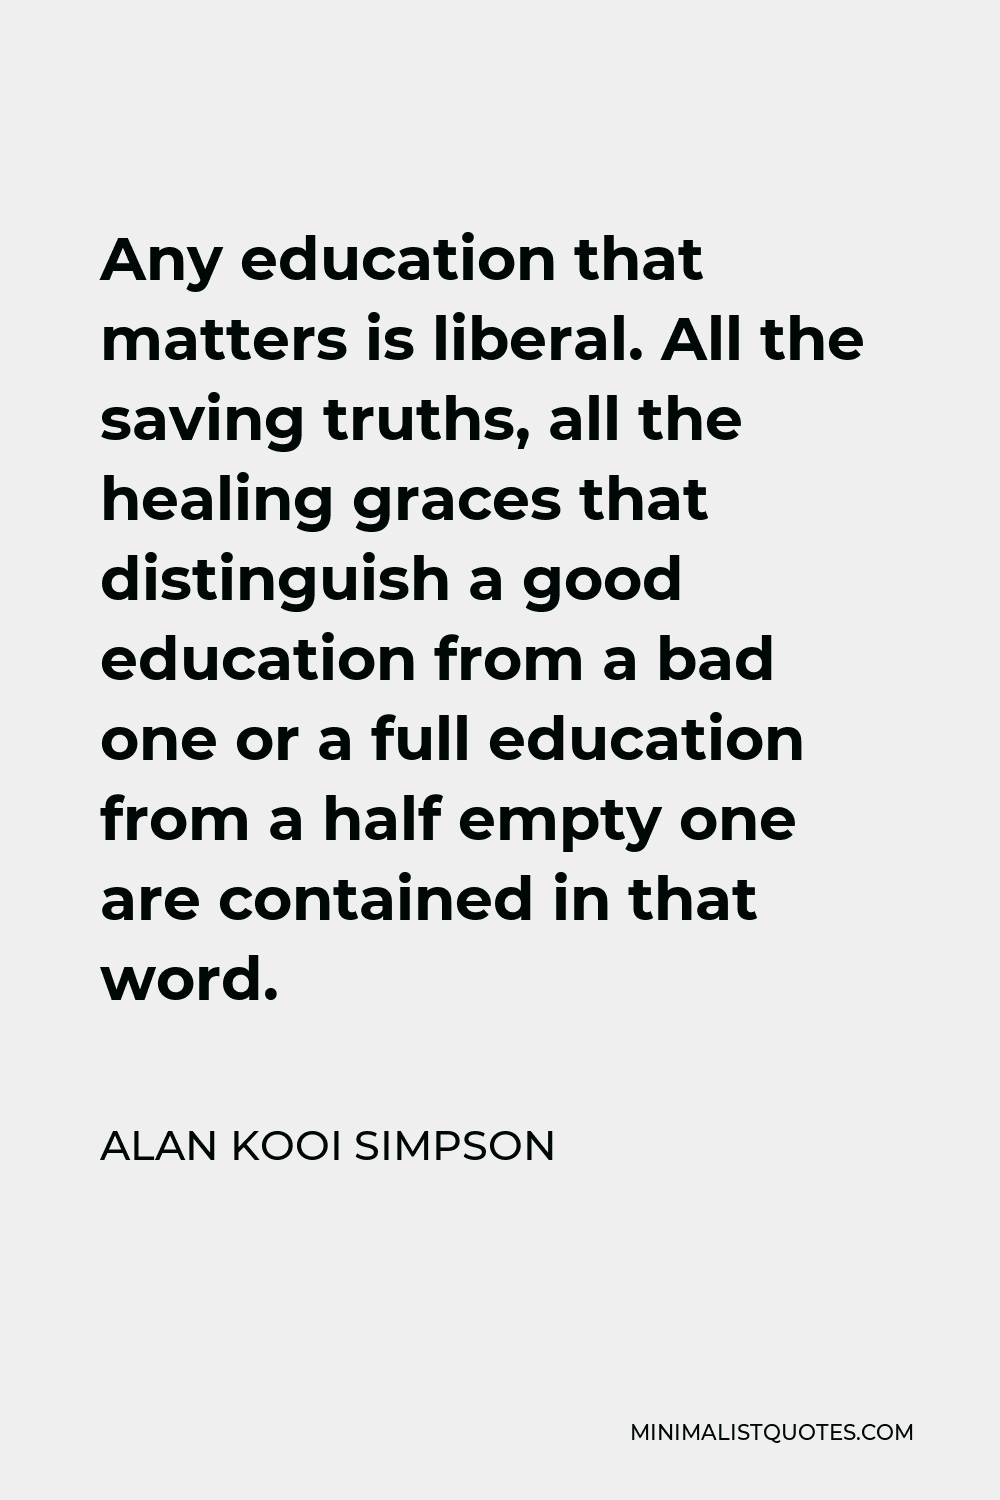 Alan Kooi Simpson Quote - Any education that matters is liberal. All the saving truths, all the healing graces that distinguish a good education from a bad one or a full education from a half empty one are contained in that word.